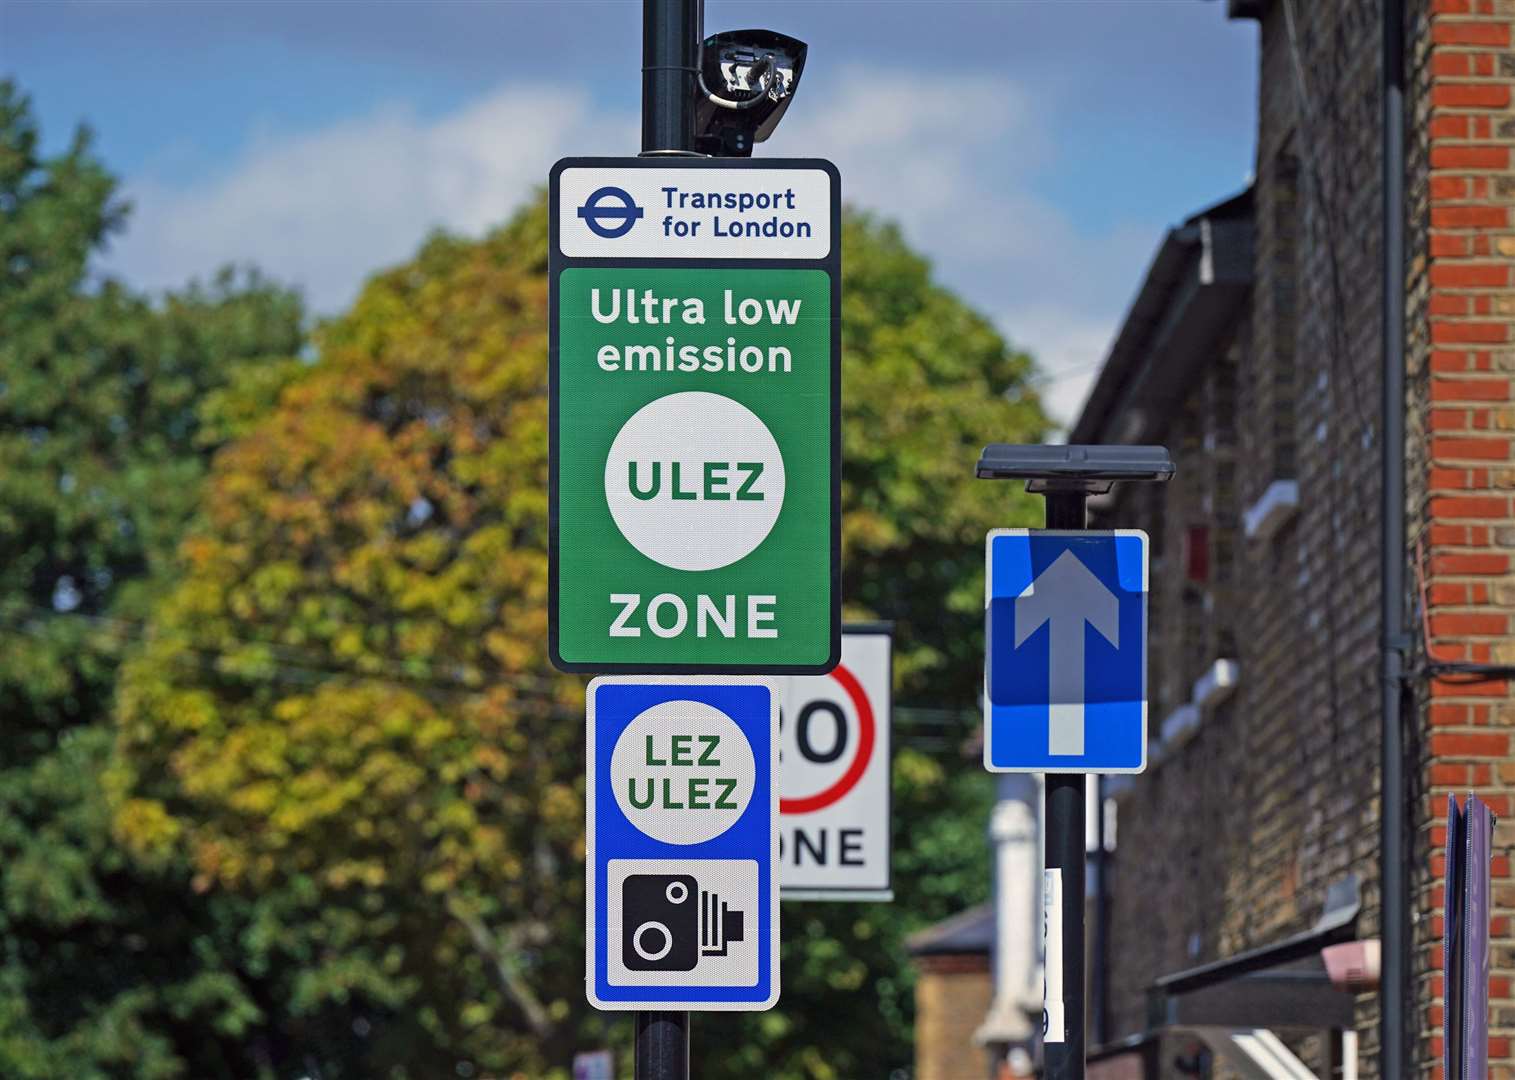 People who drive in the zone in a vehicle which does not meet minimum emissions standards are now required to pay a £12.50 daily fee or risk a fine (Yui Mok/PA)